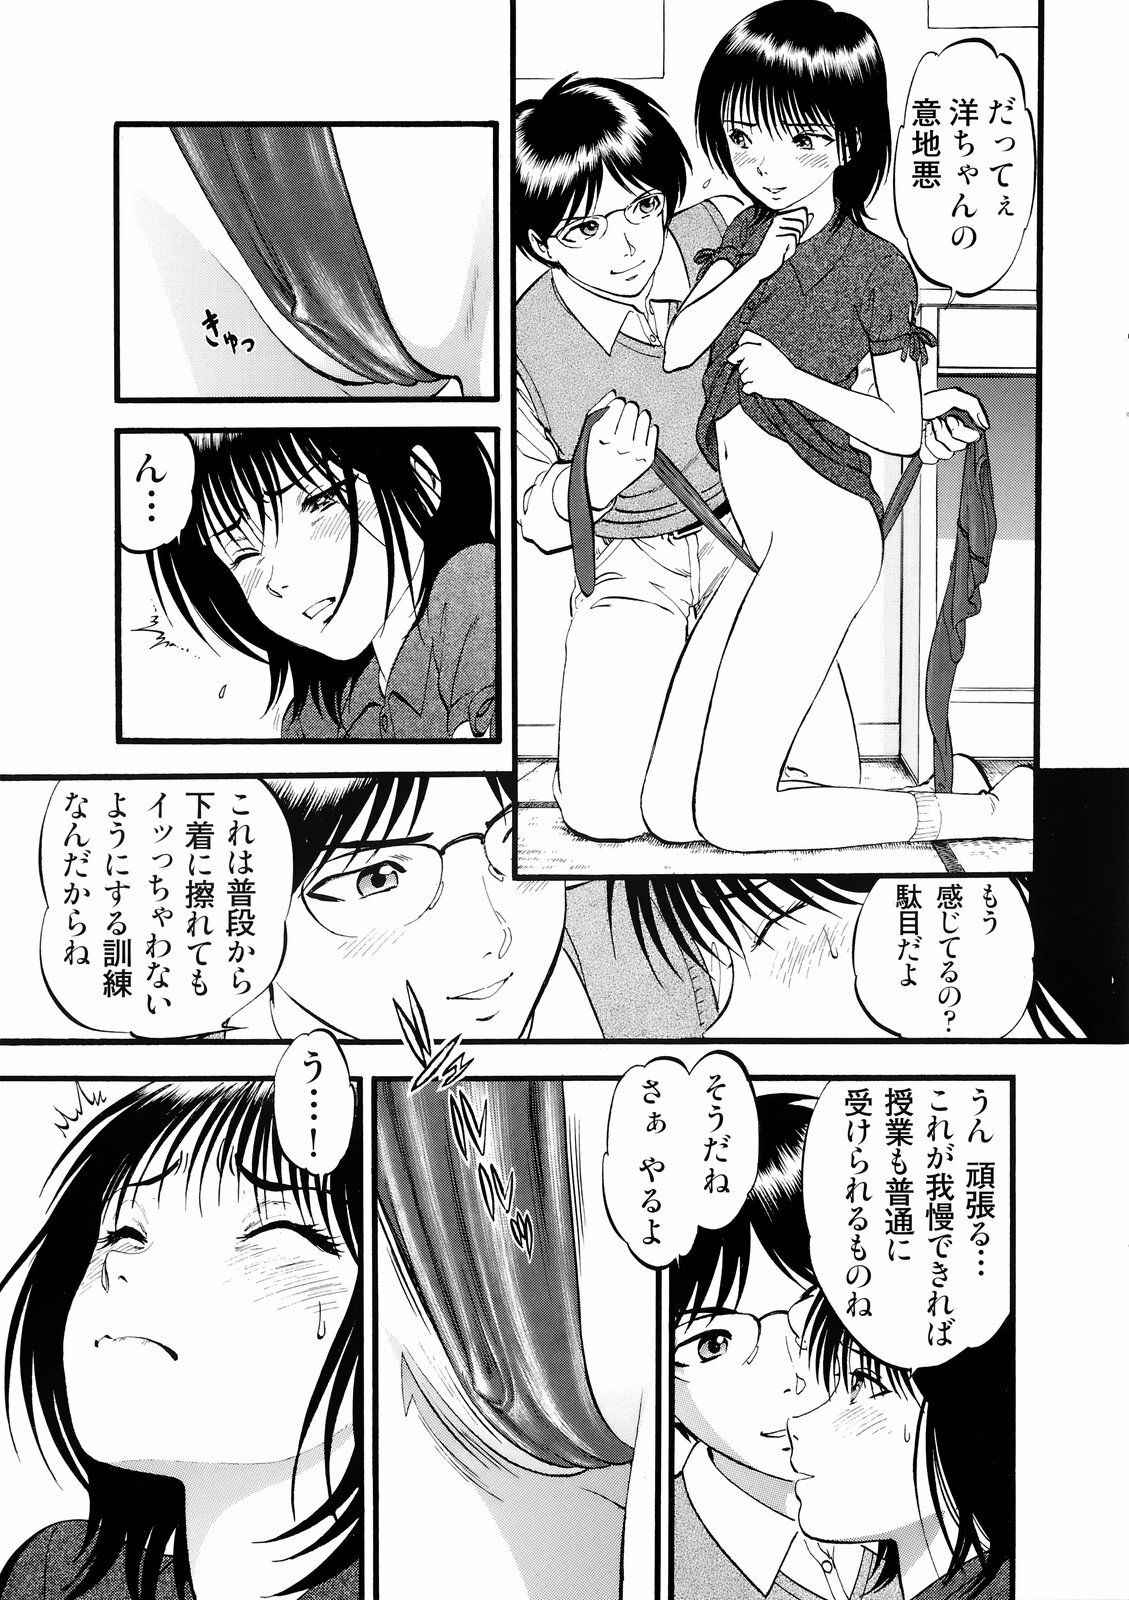 COMIC Moemax Jr. 2009-06 (Incomplete) page 37 full